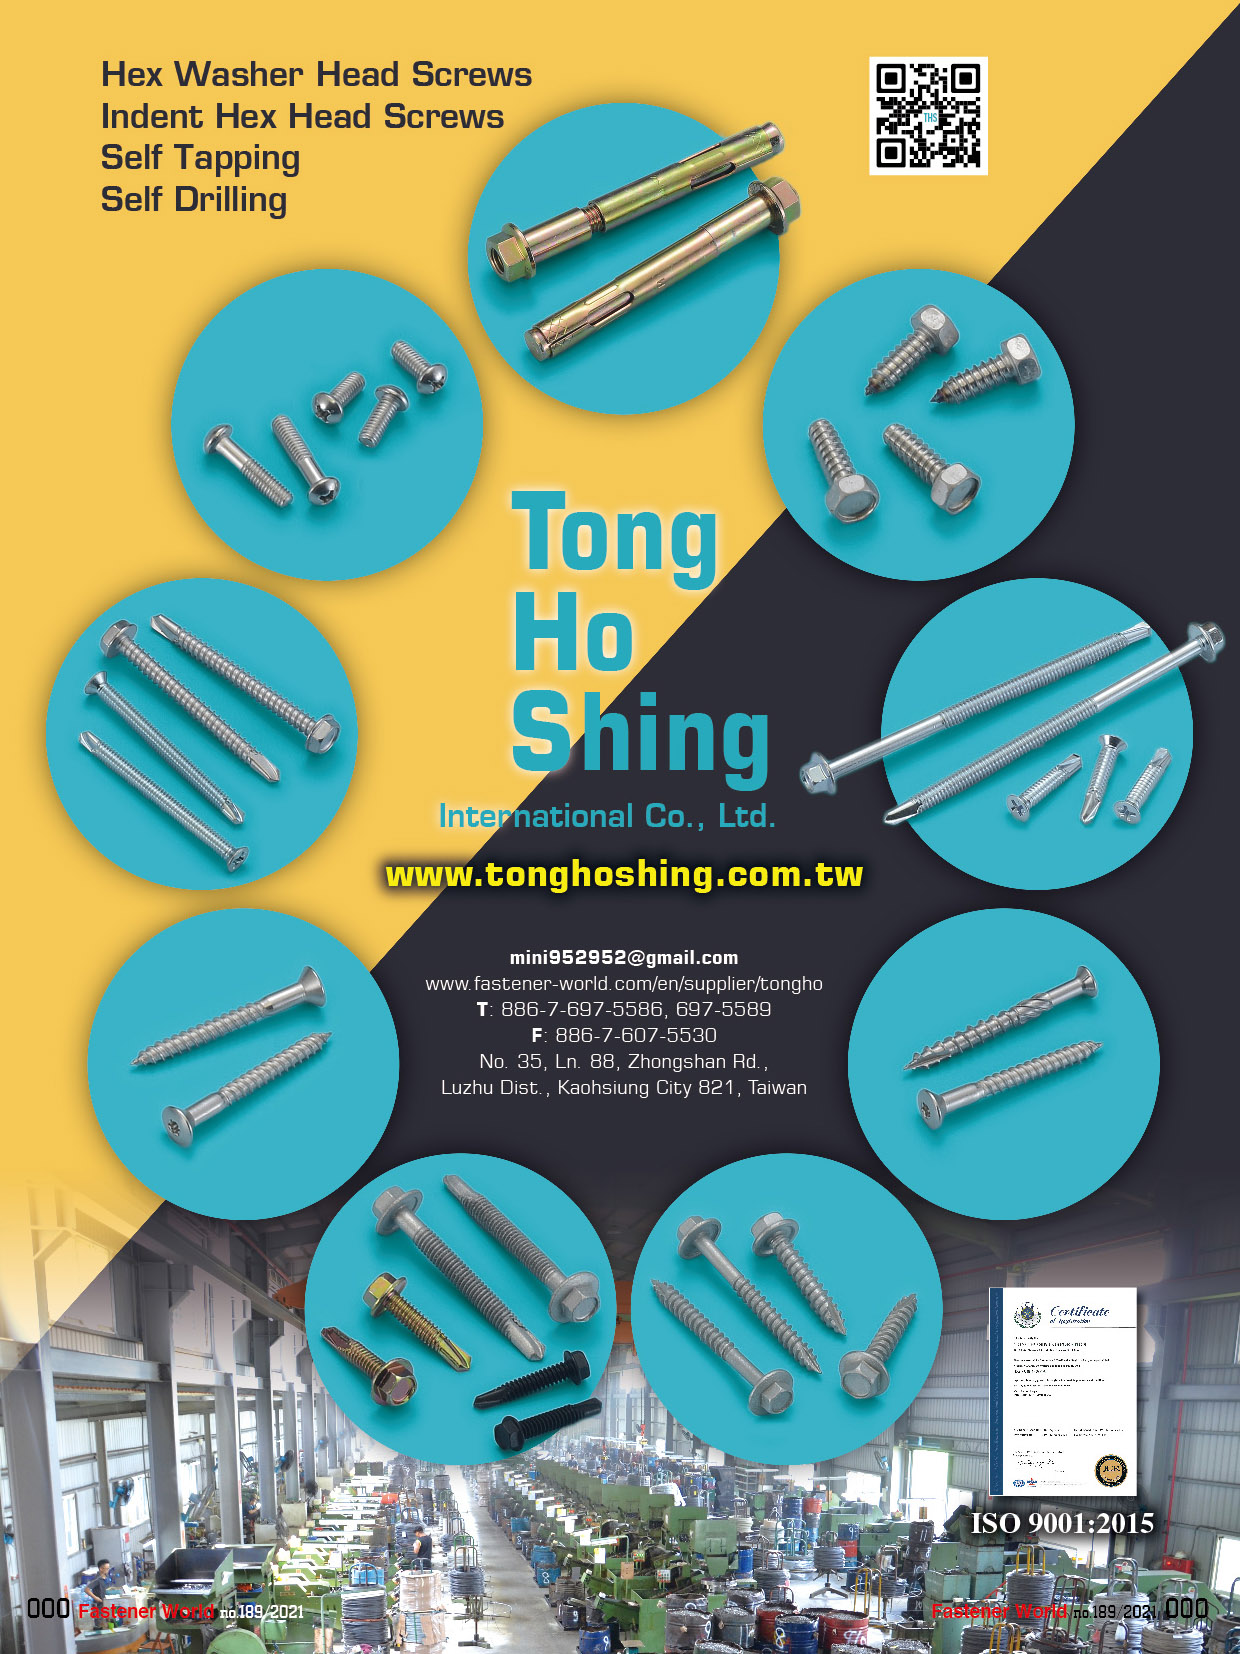 TONG HO SHING INTERNATIONAL CO., LTD. , Self Drilling Screws, Self Tapping Screw, Indent Hex Head Screw, Hex Washer Head Screw